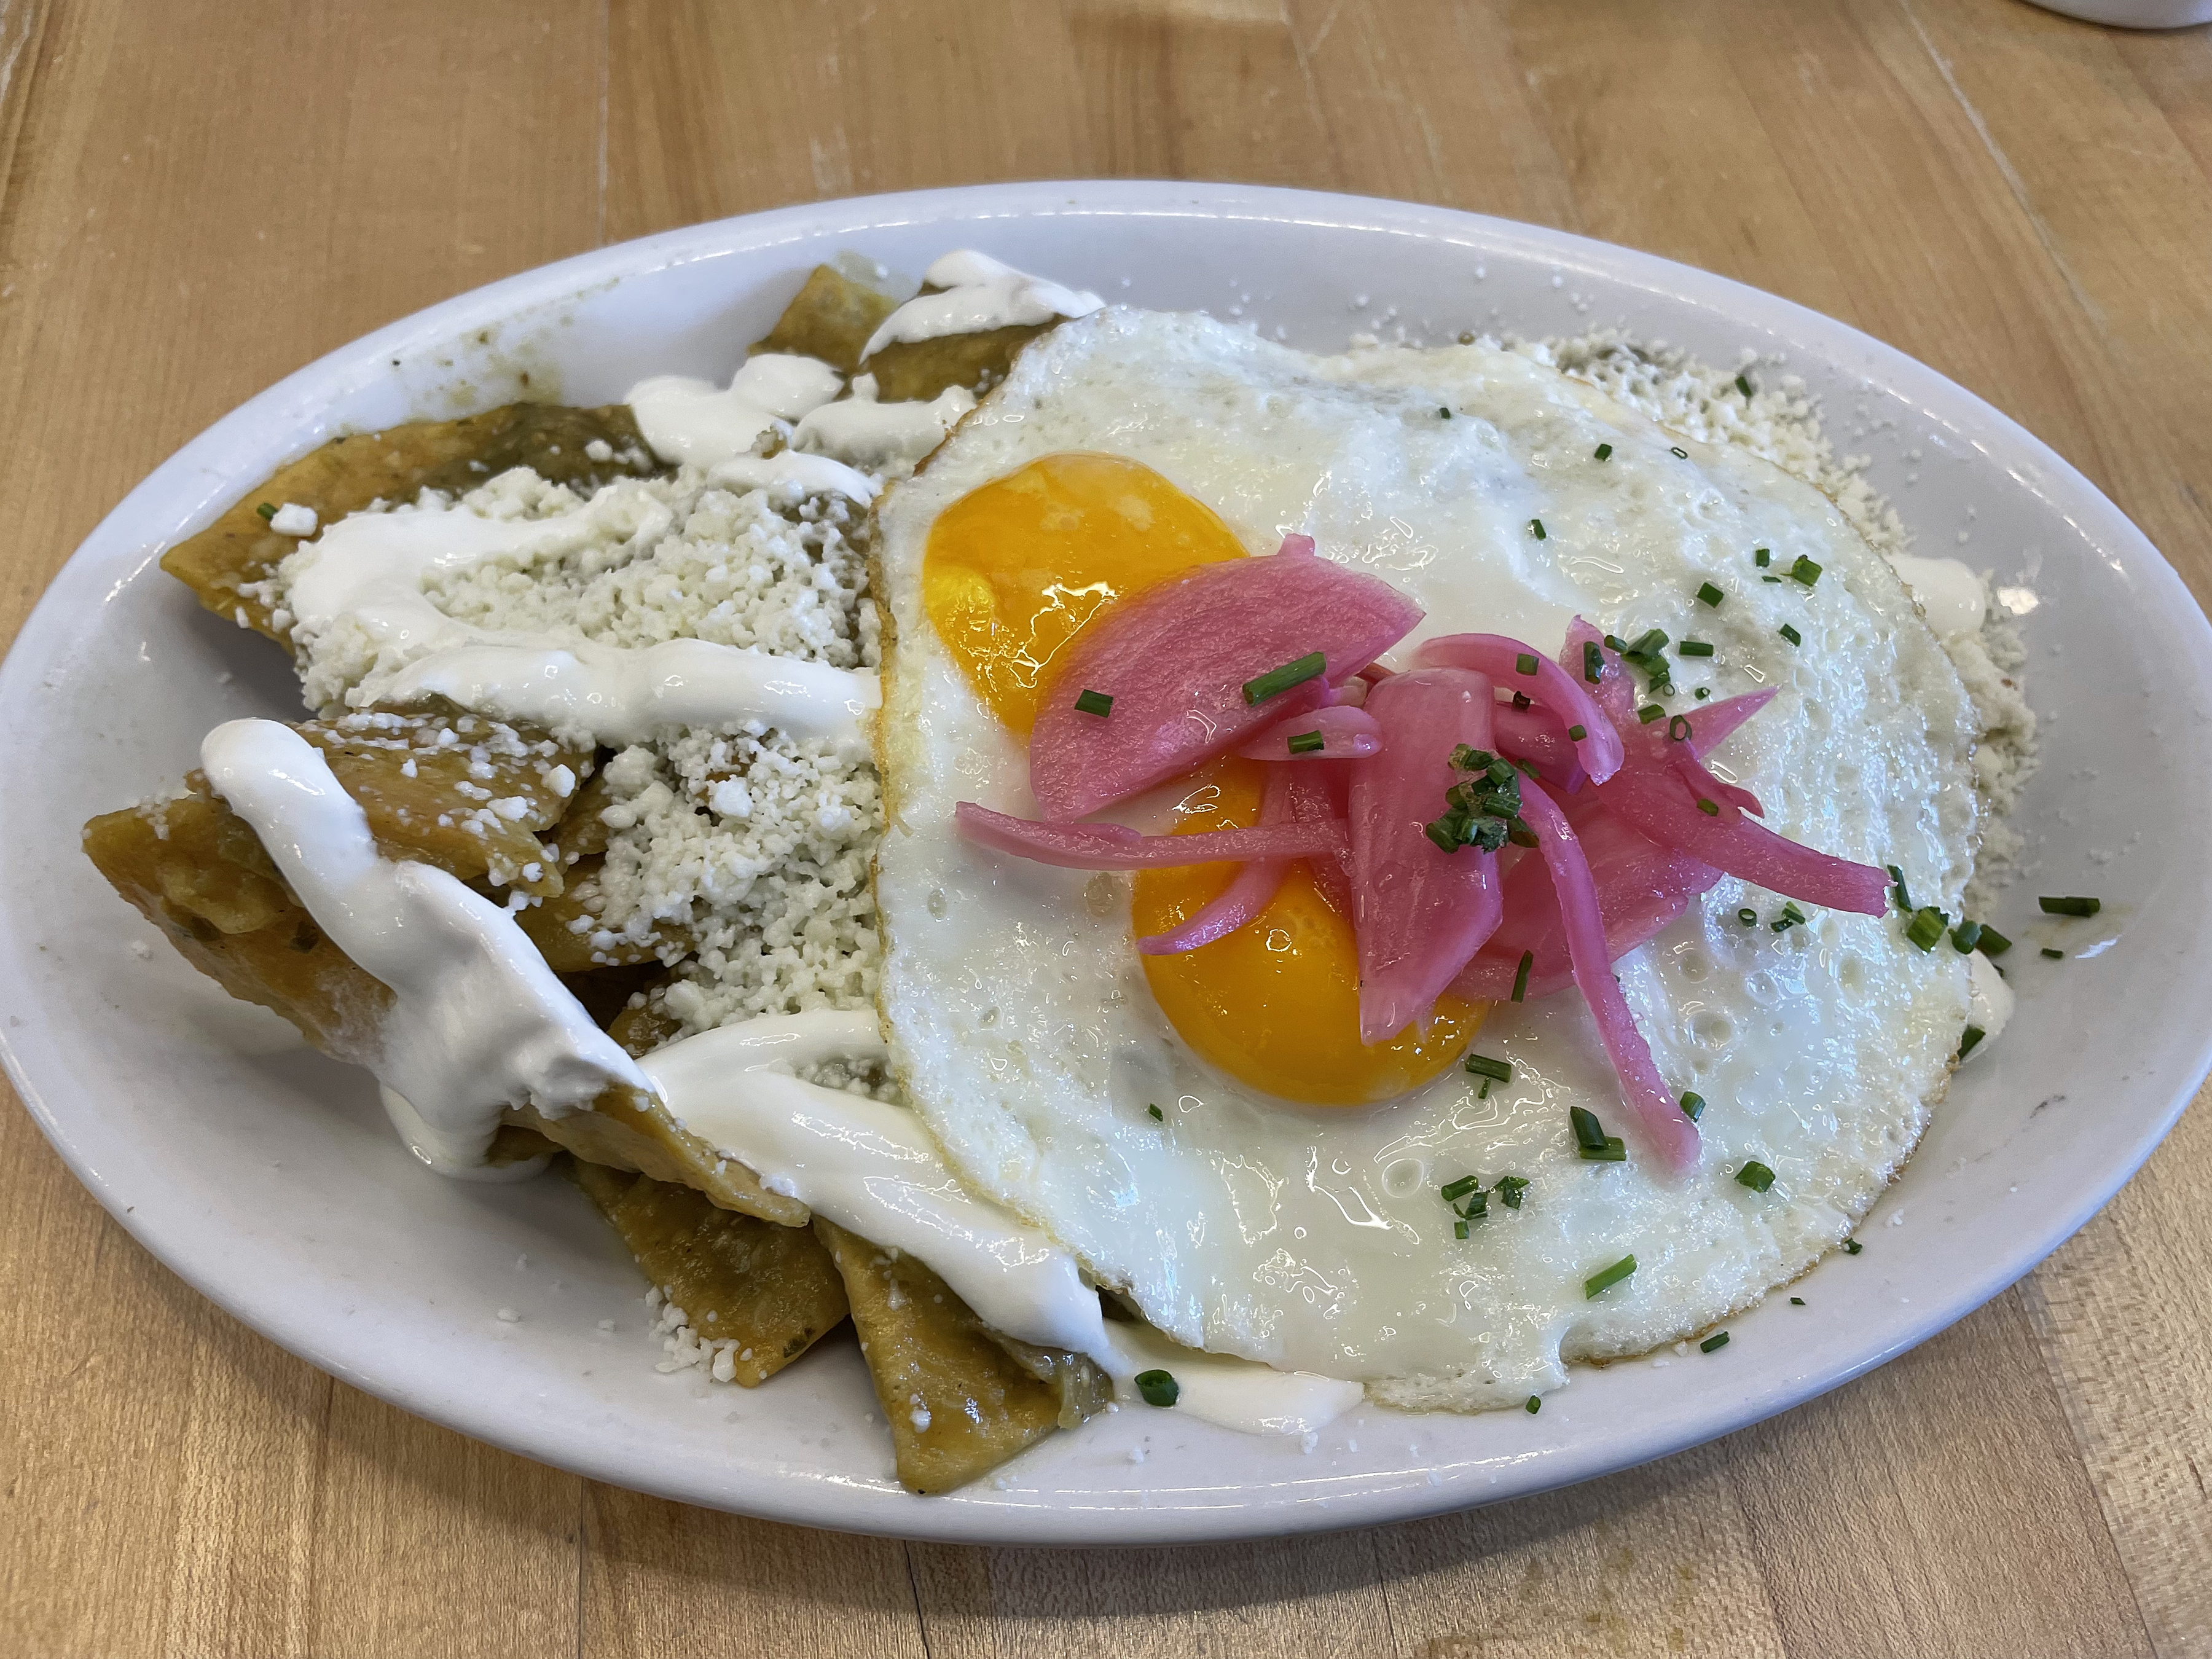 It usually takes me a couple of minutes to figure out how to eat chilaquiles, but I never regret ordering Con Huevos' version of this filling breakfast dish.